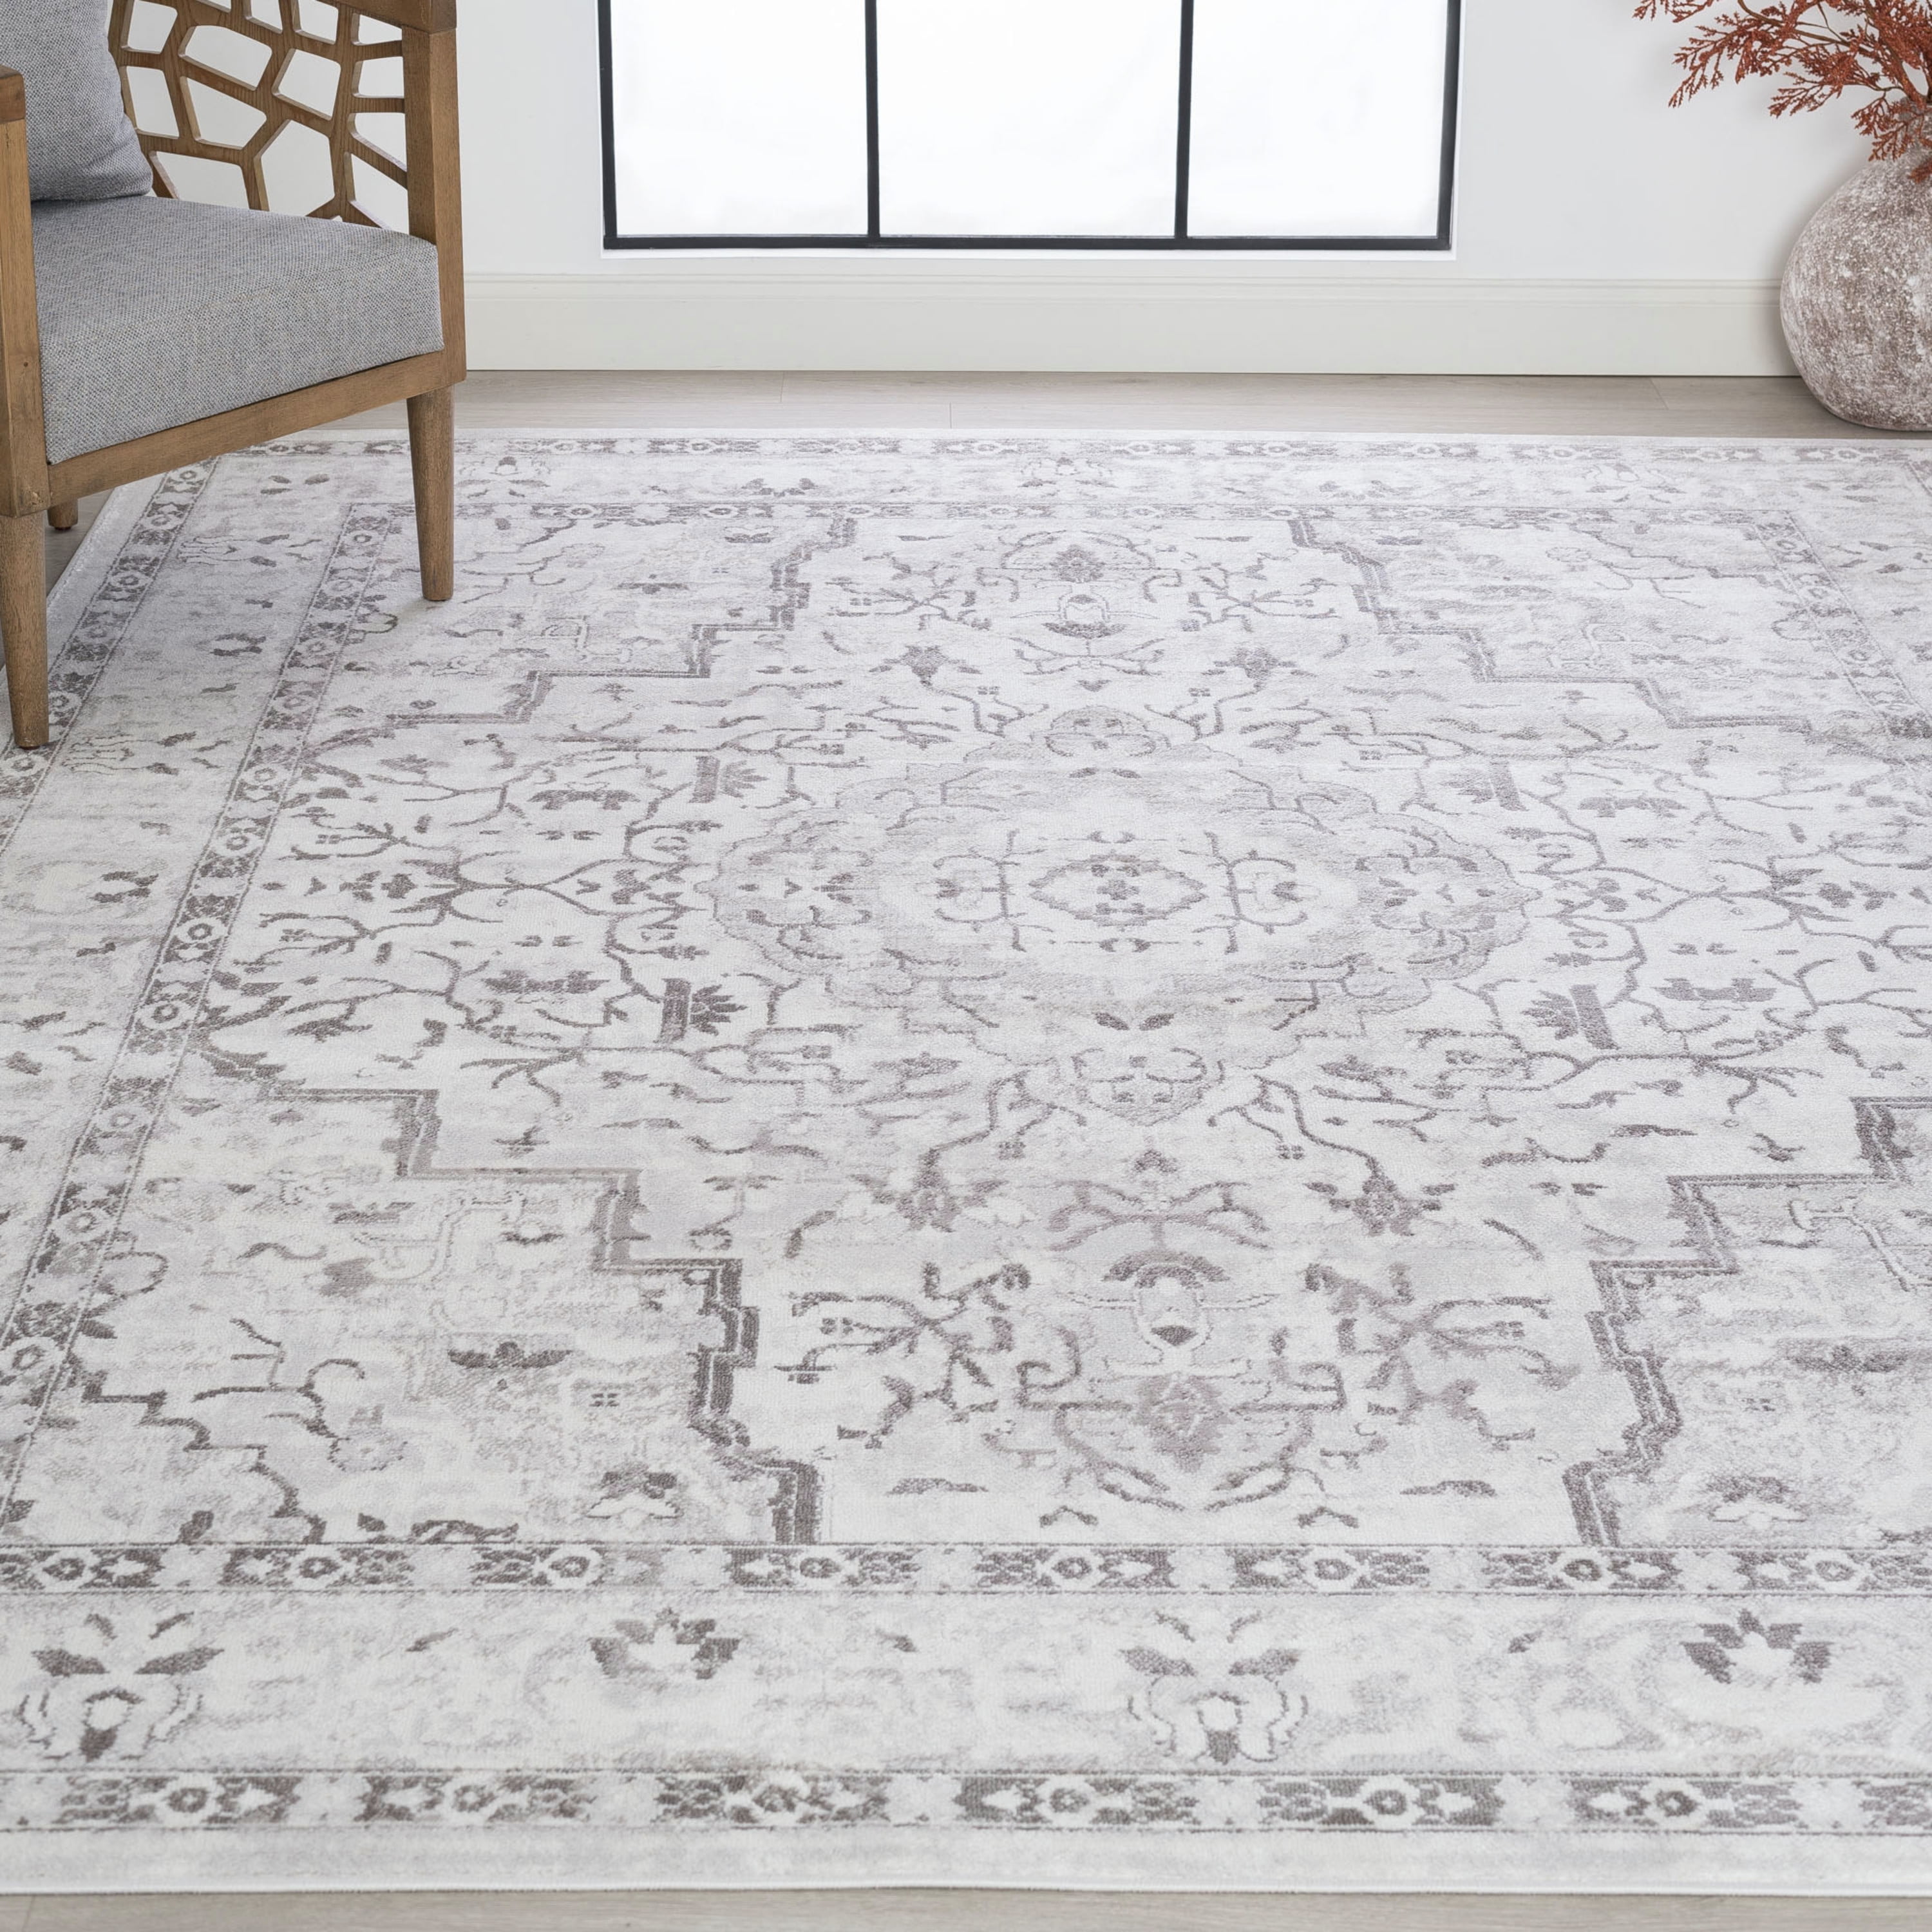 Traditional Rug Grey Oriental Shabby Chic Pattern Mat Small Large Bedroom Carpet 